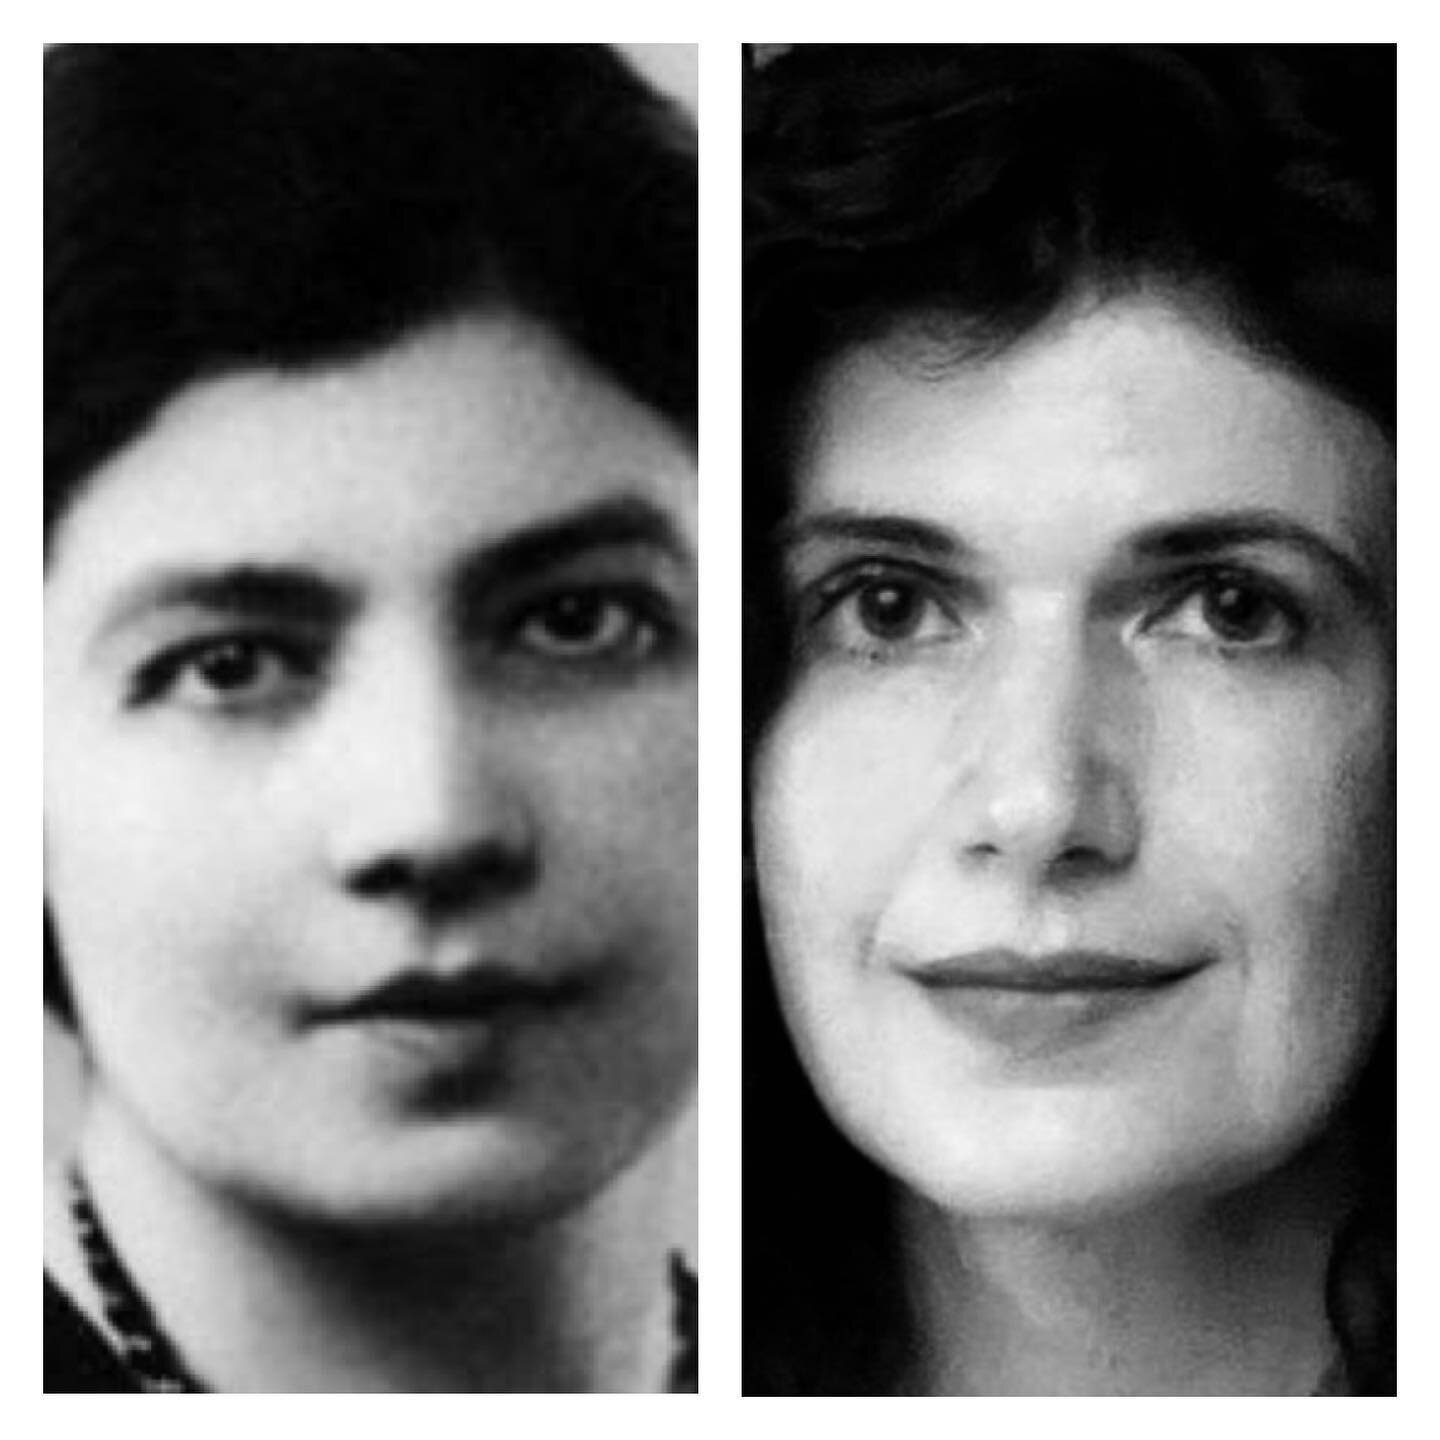 May Ziadeh (1886-1941) was a Lebanese-Palestinian writer who has come to feel like a ghostly sister and friend as I&rsquo;ve been slowly making creative translations of her poetry for the last few years. Thanks to @diodeeditions for publishing this o